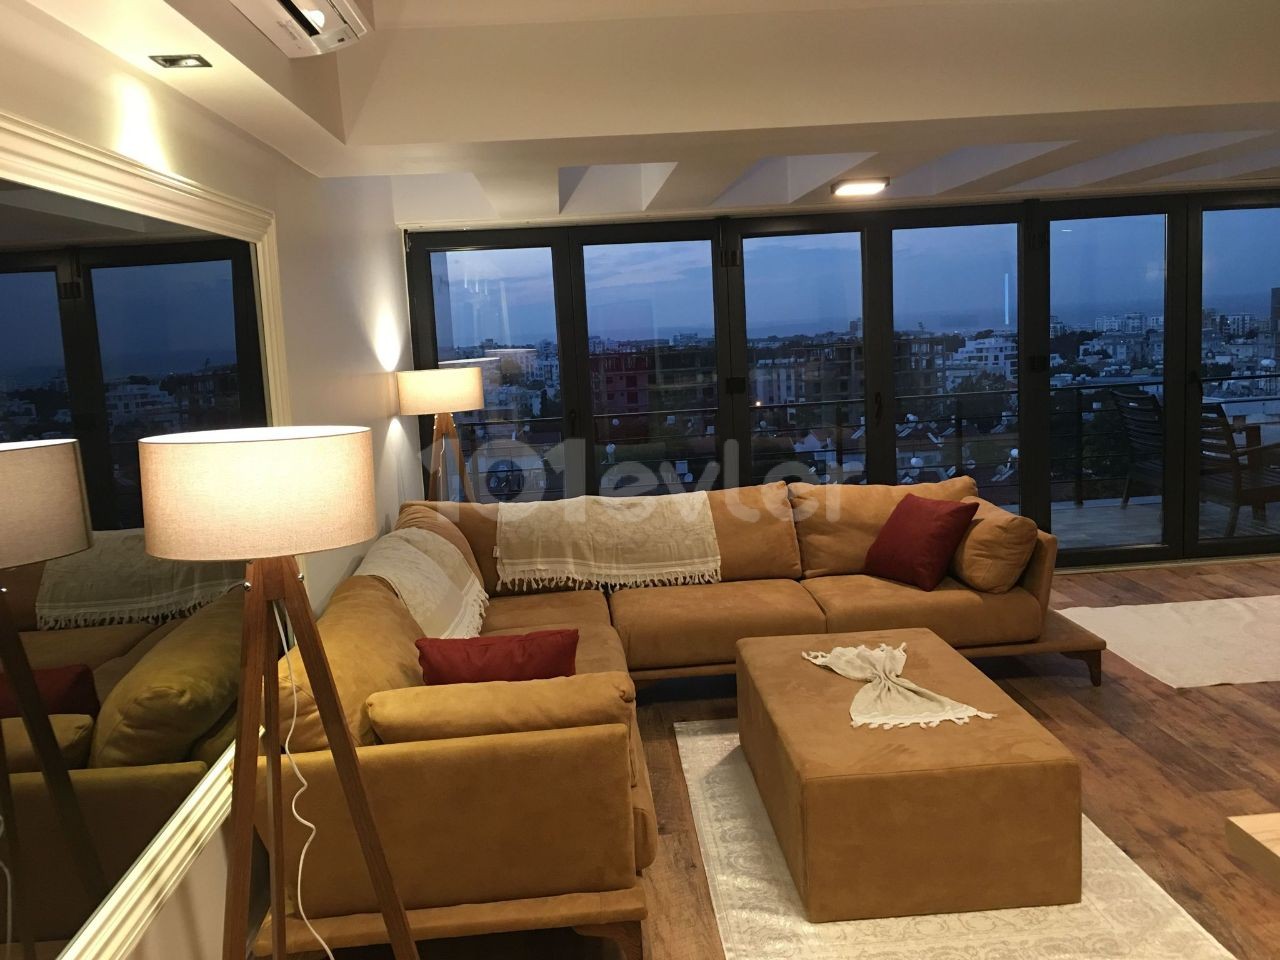 LUXURIOUS PENTHOUSE IN THE HEART OF KYRENIA, WHERE YOU CAN LIVE WITH THE COMFORT OF A HOTEL...